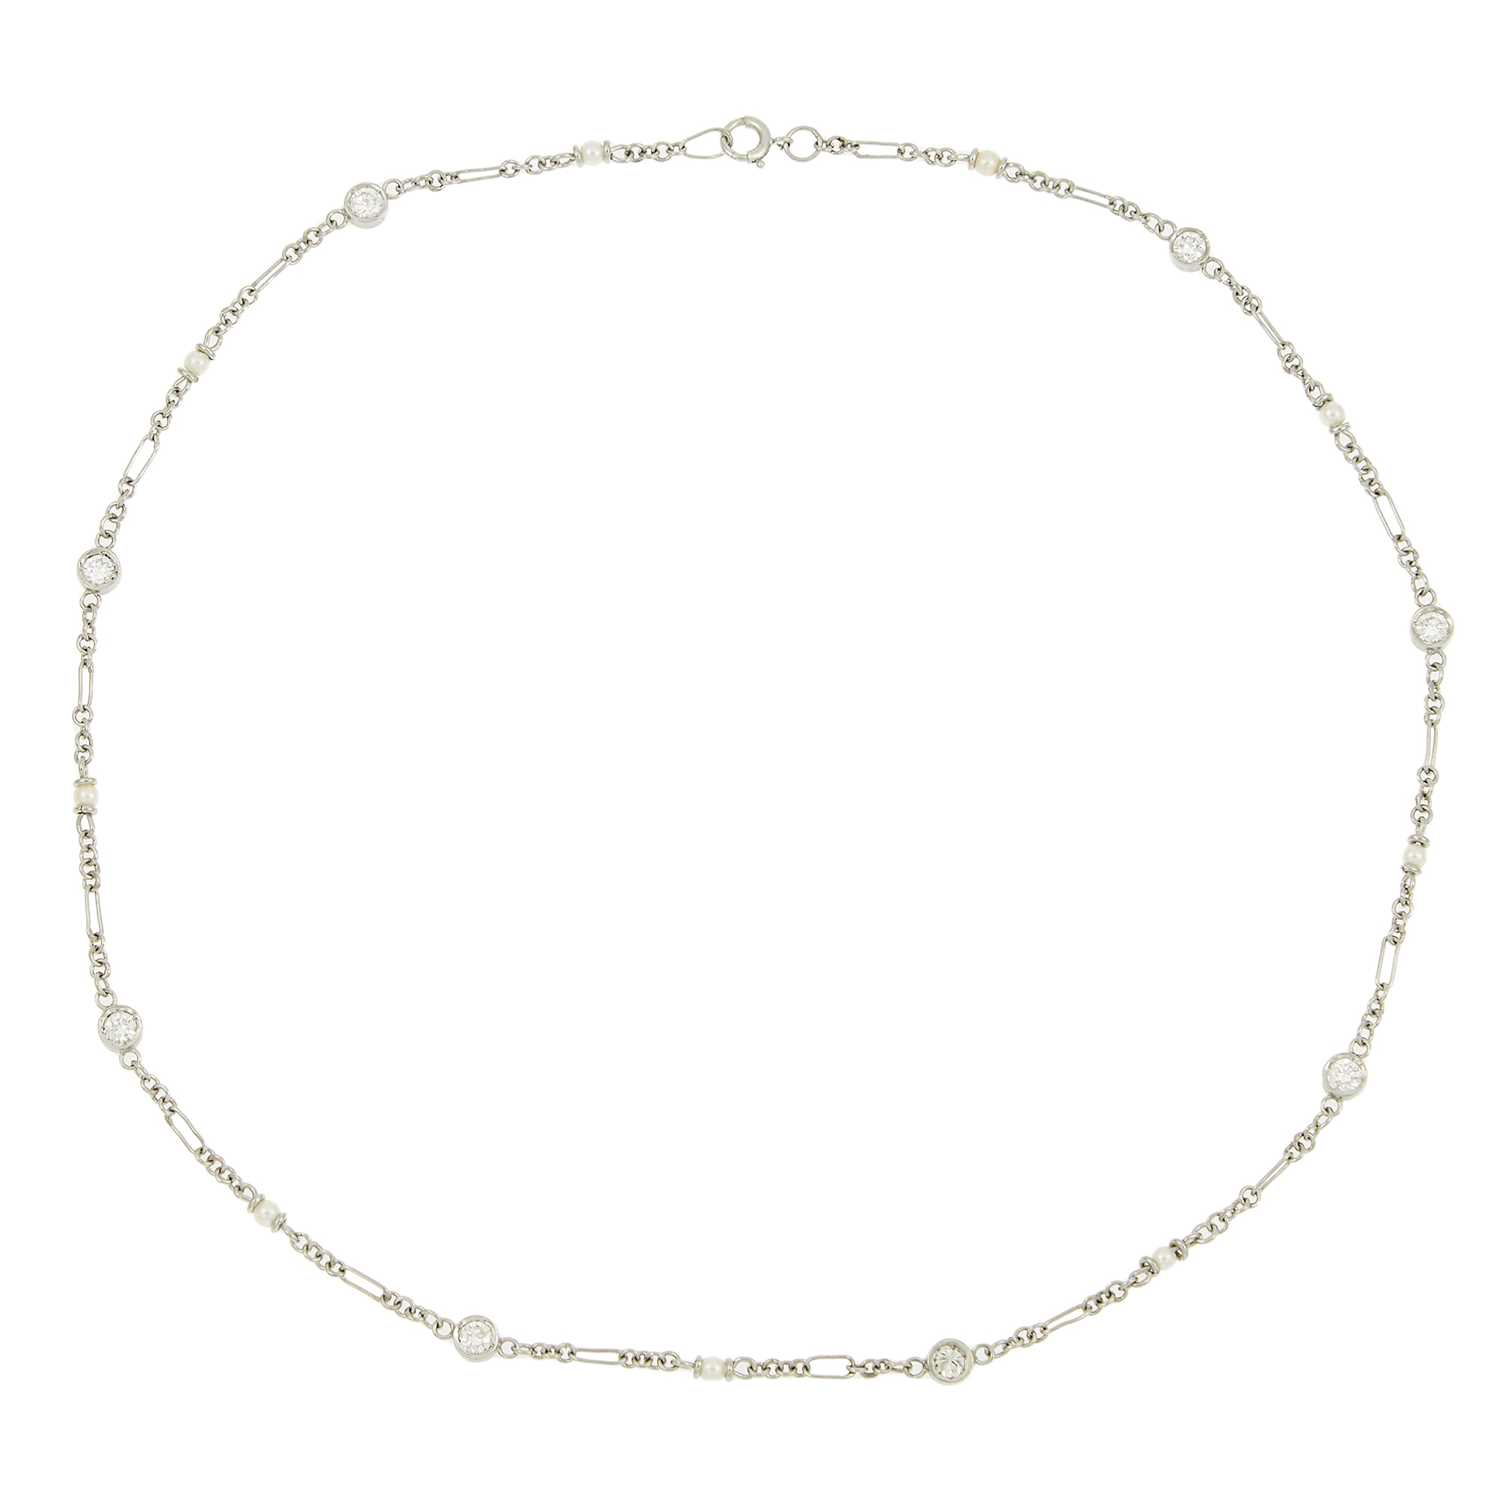 Lot 1256 - Platinum, Diamond and Cultured Pearl Necklace